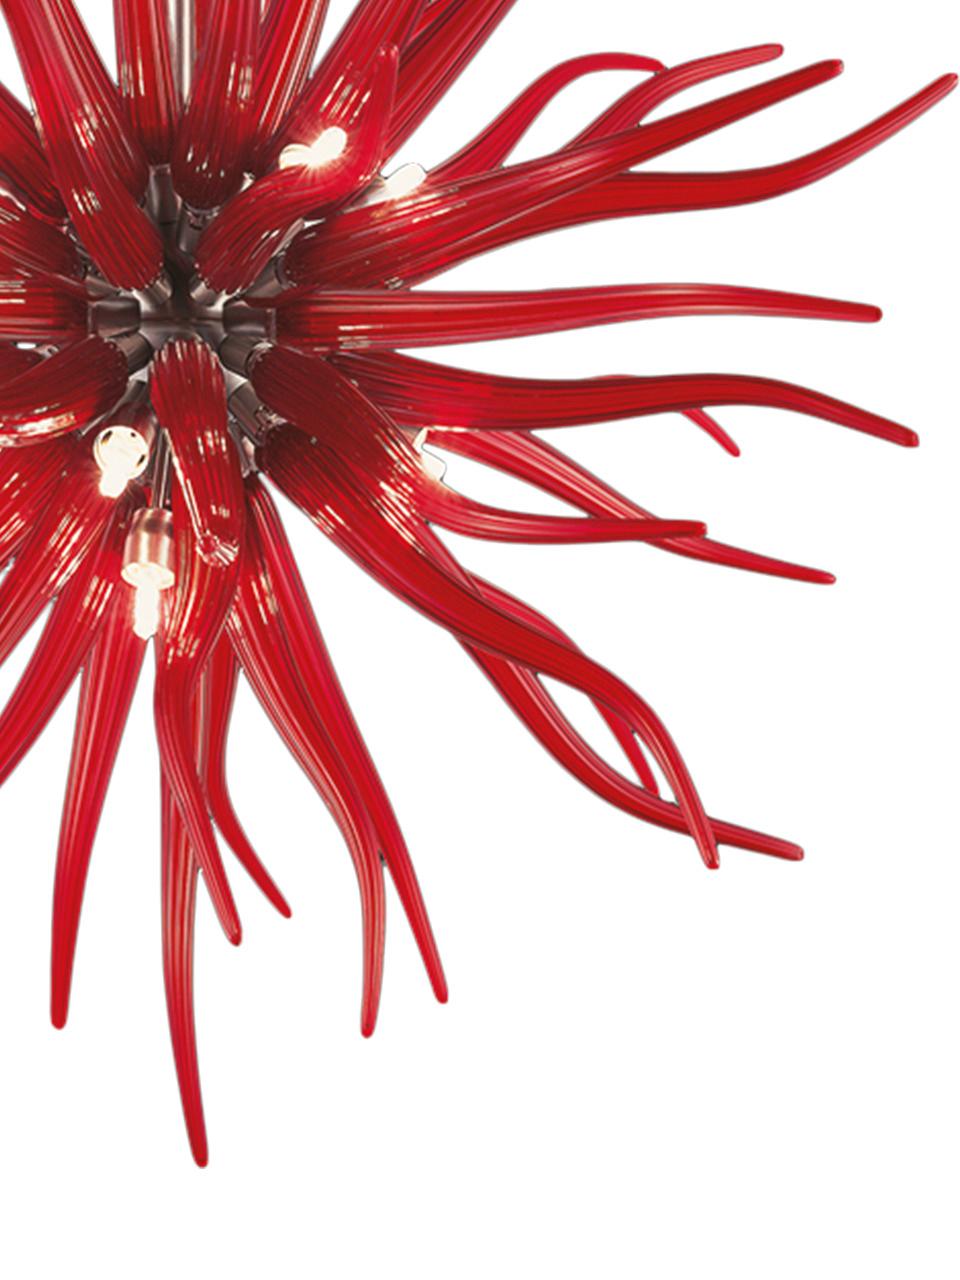 Medusa, it's a unique Handcrafted modern suspension according the ancient Murano glass tradition.
Simple lines embellished with unique decorations, created in our furnace in Murano - Venice.